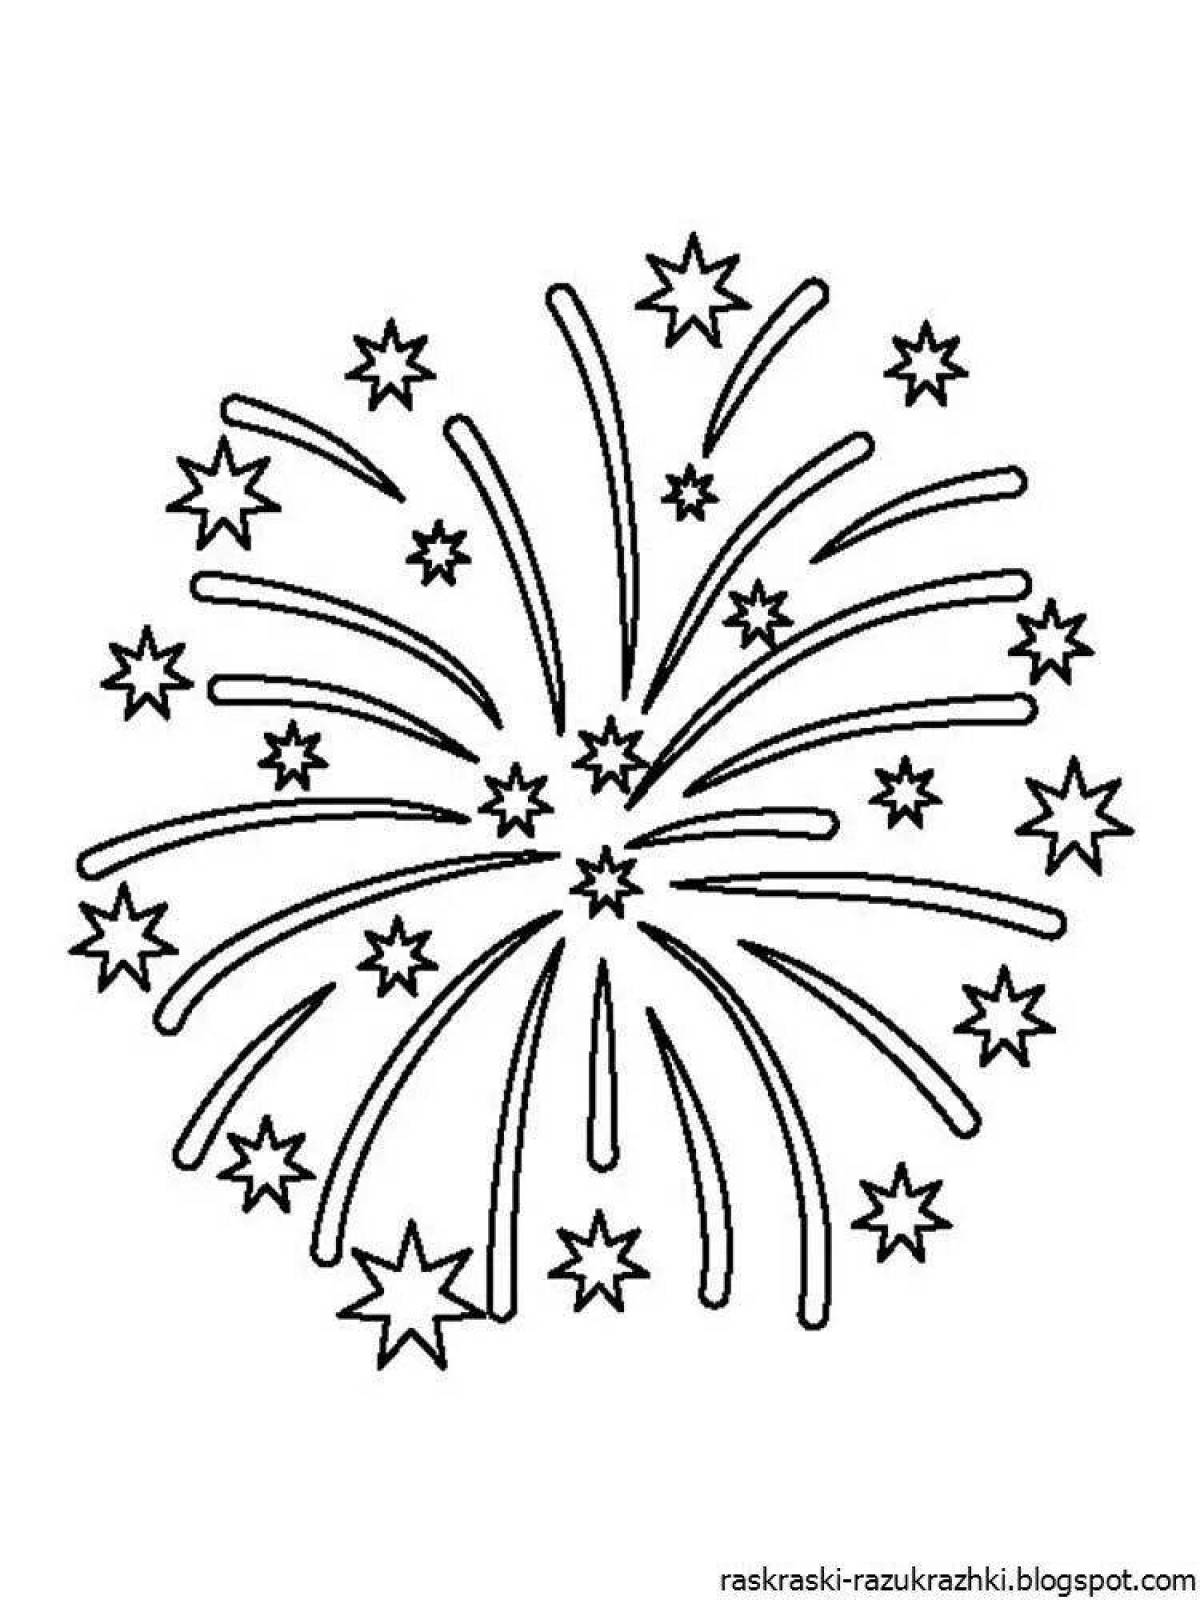 Playful fireworks coloring page for kids